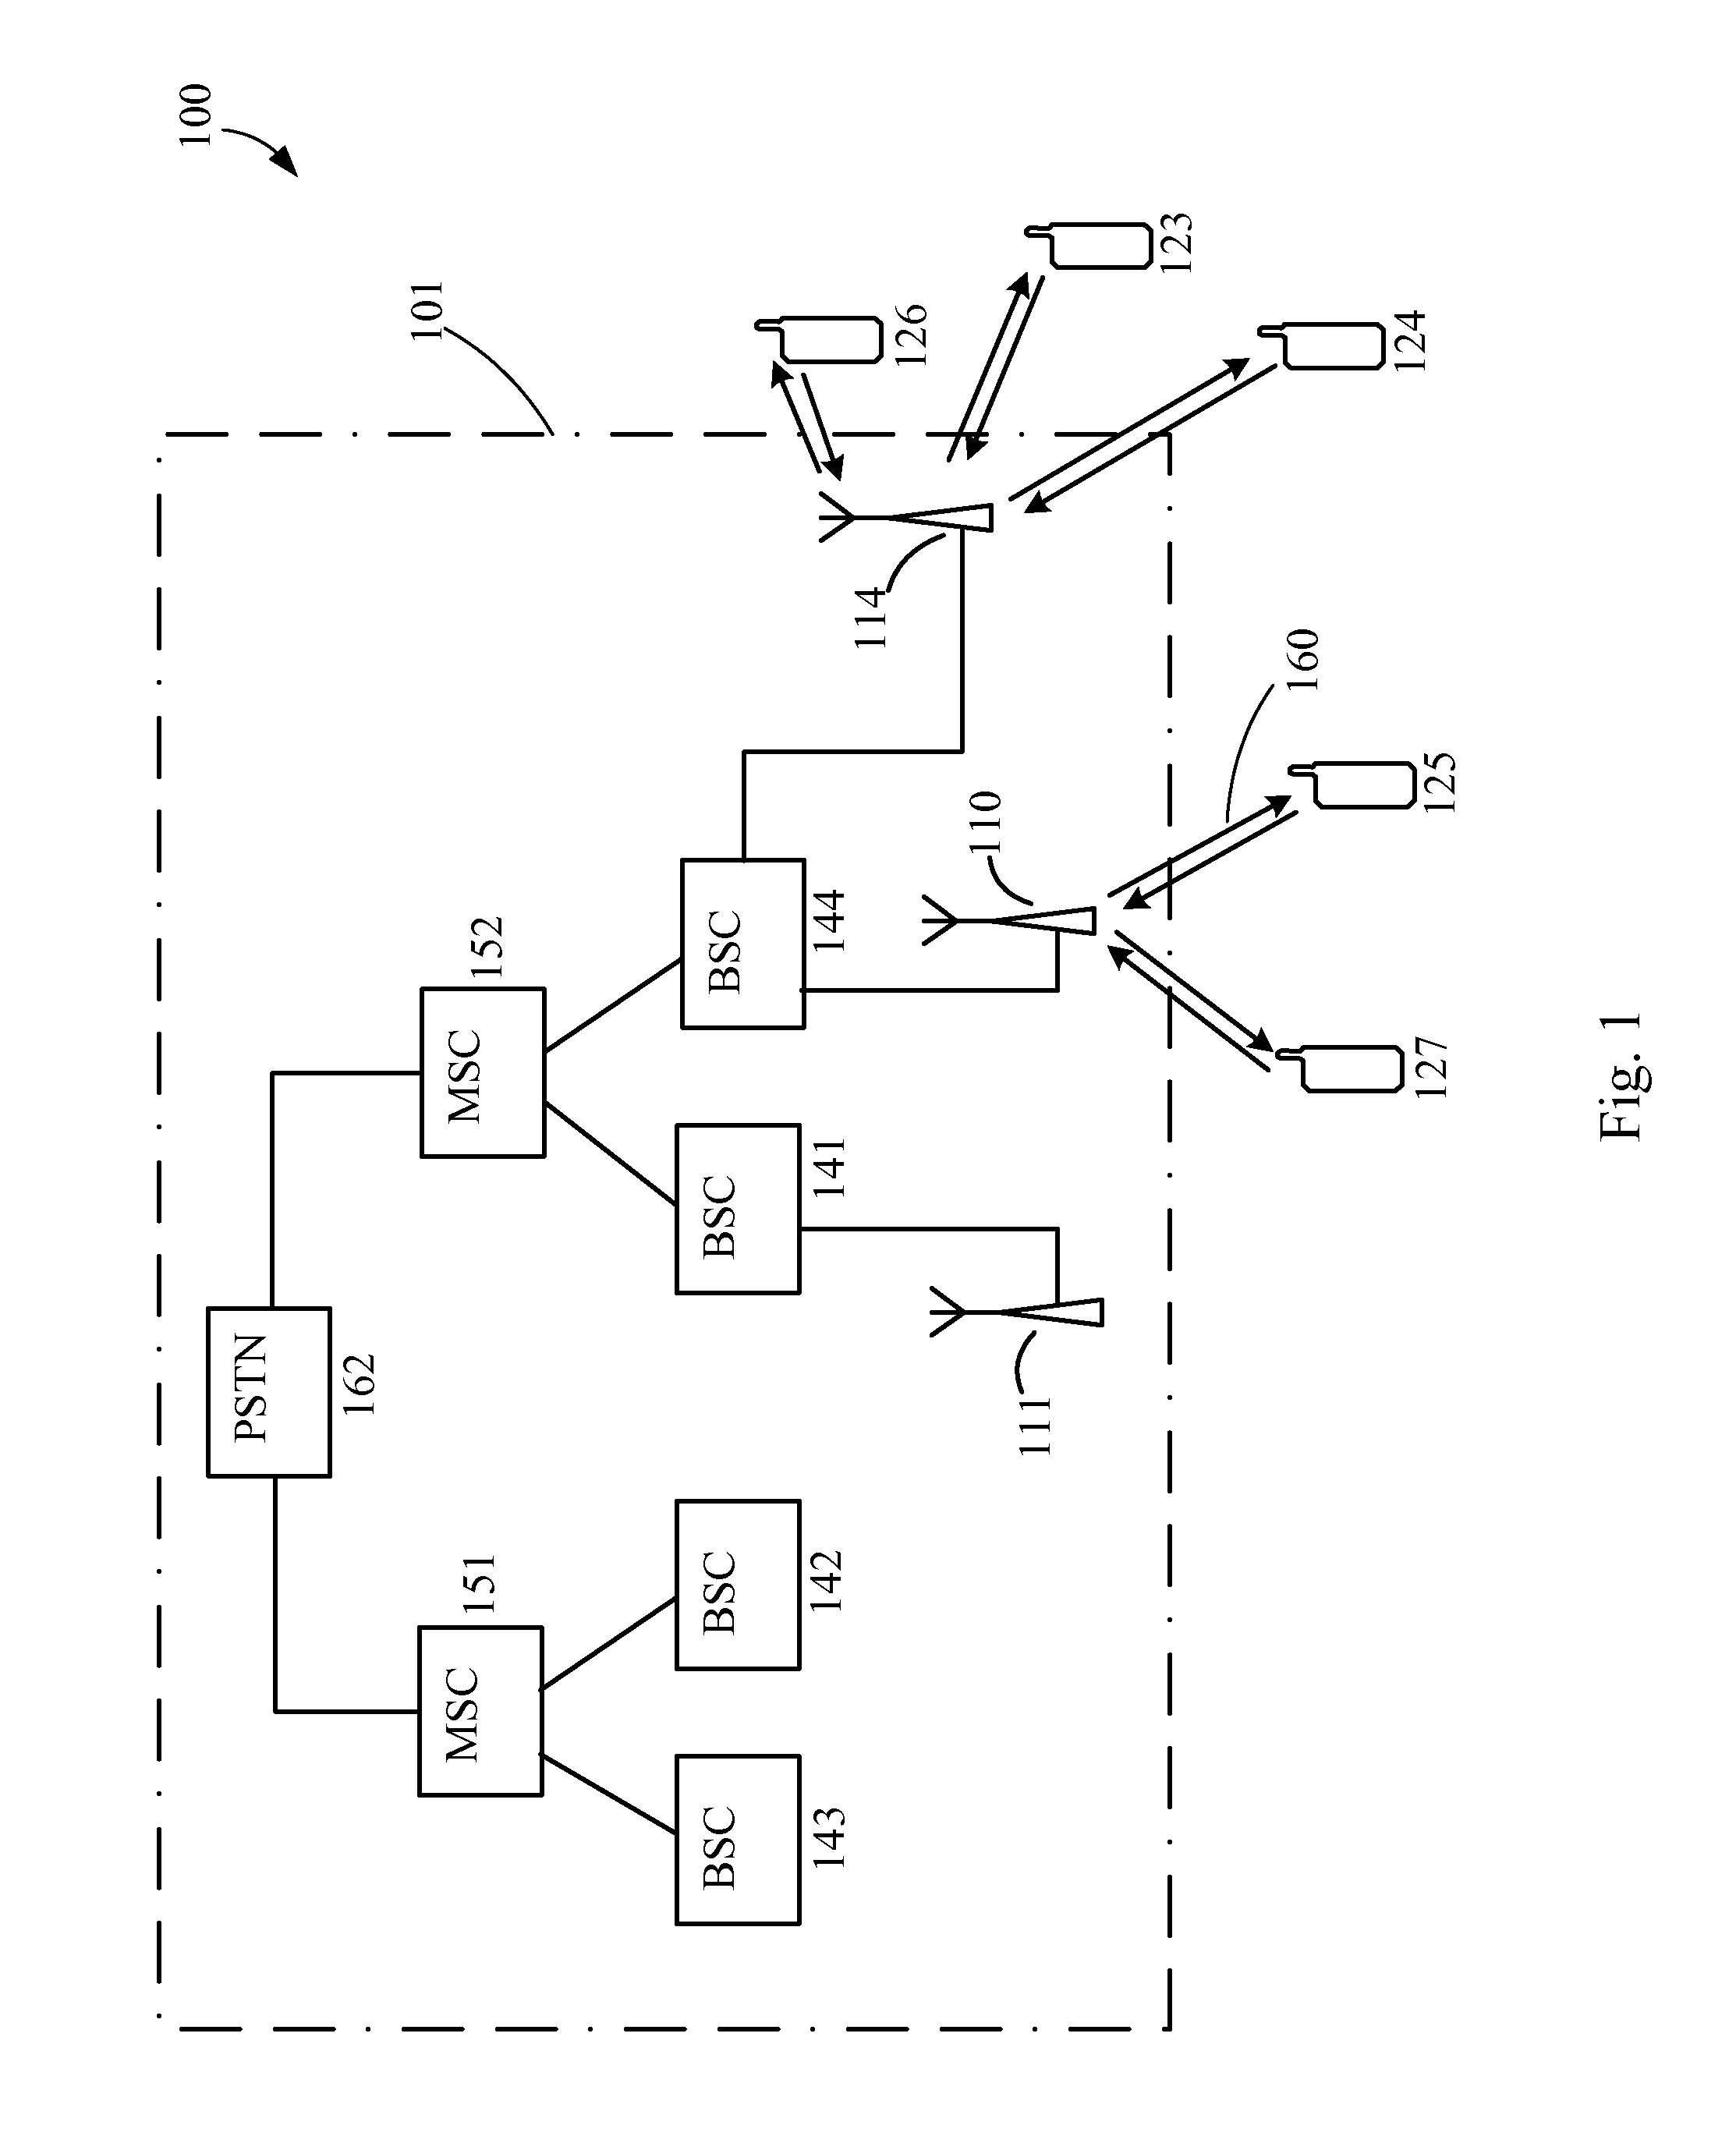 Method and apparatus for assigning wireless network packet resources to wireless terminals